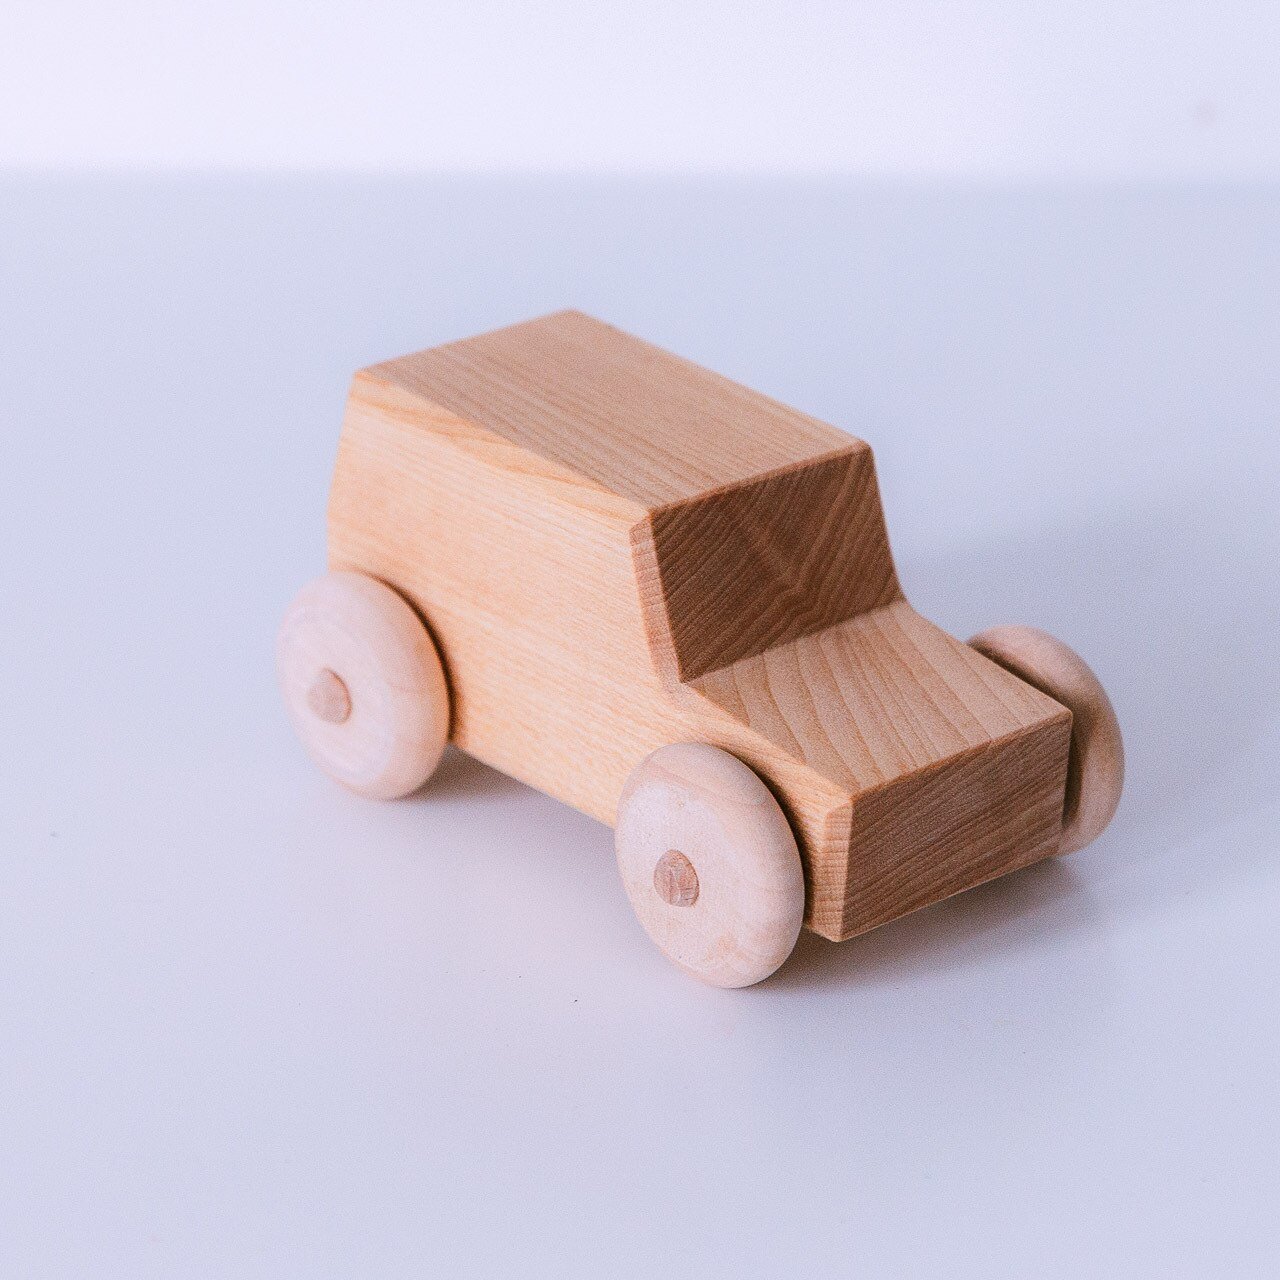 Wooden cars